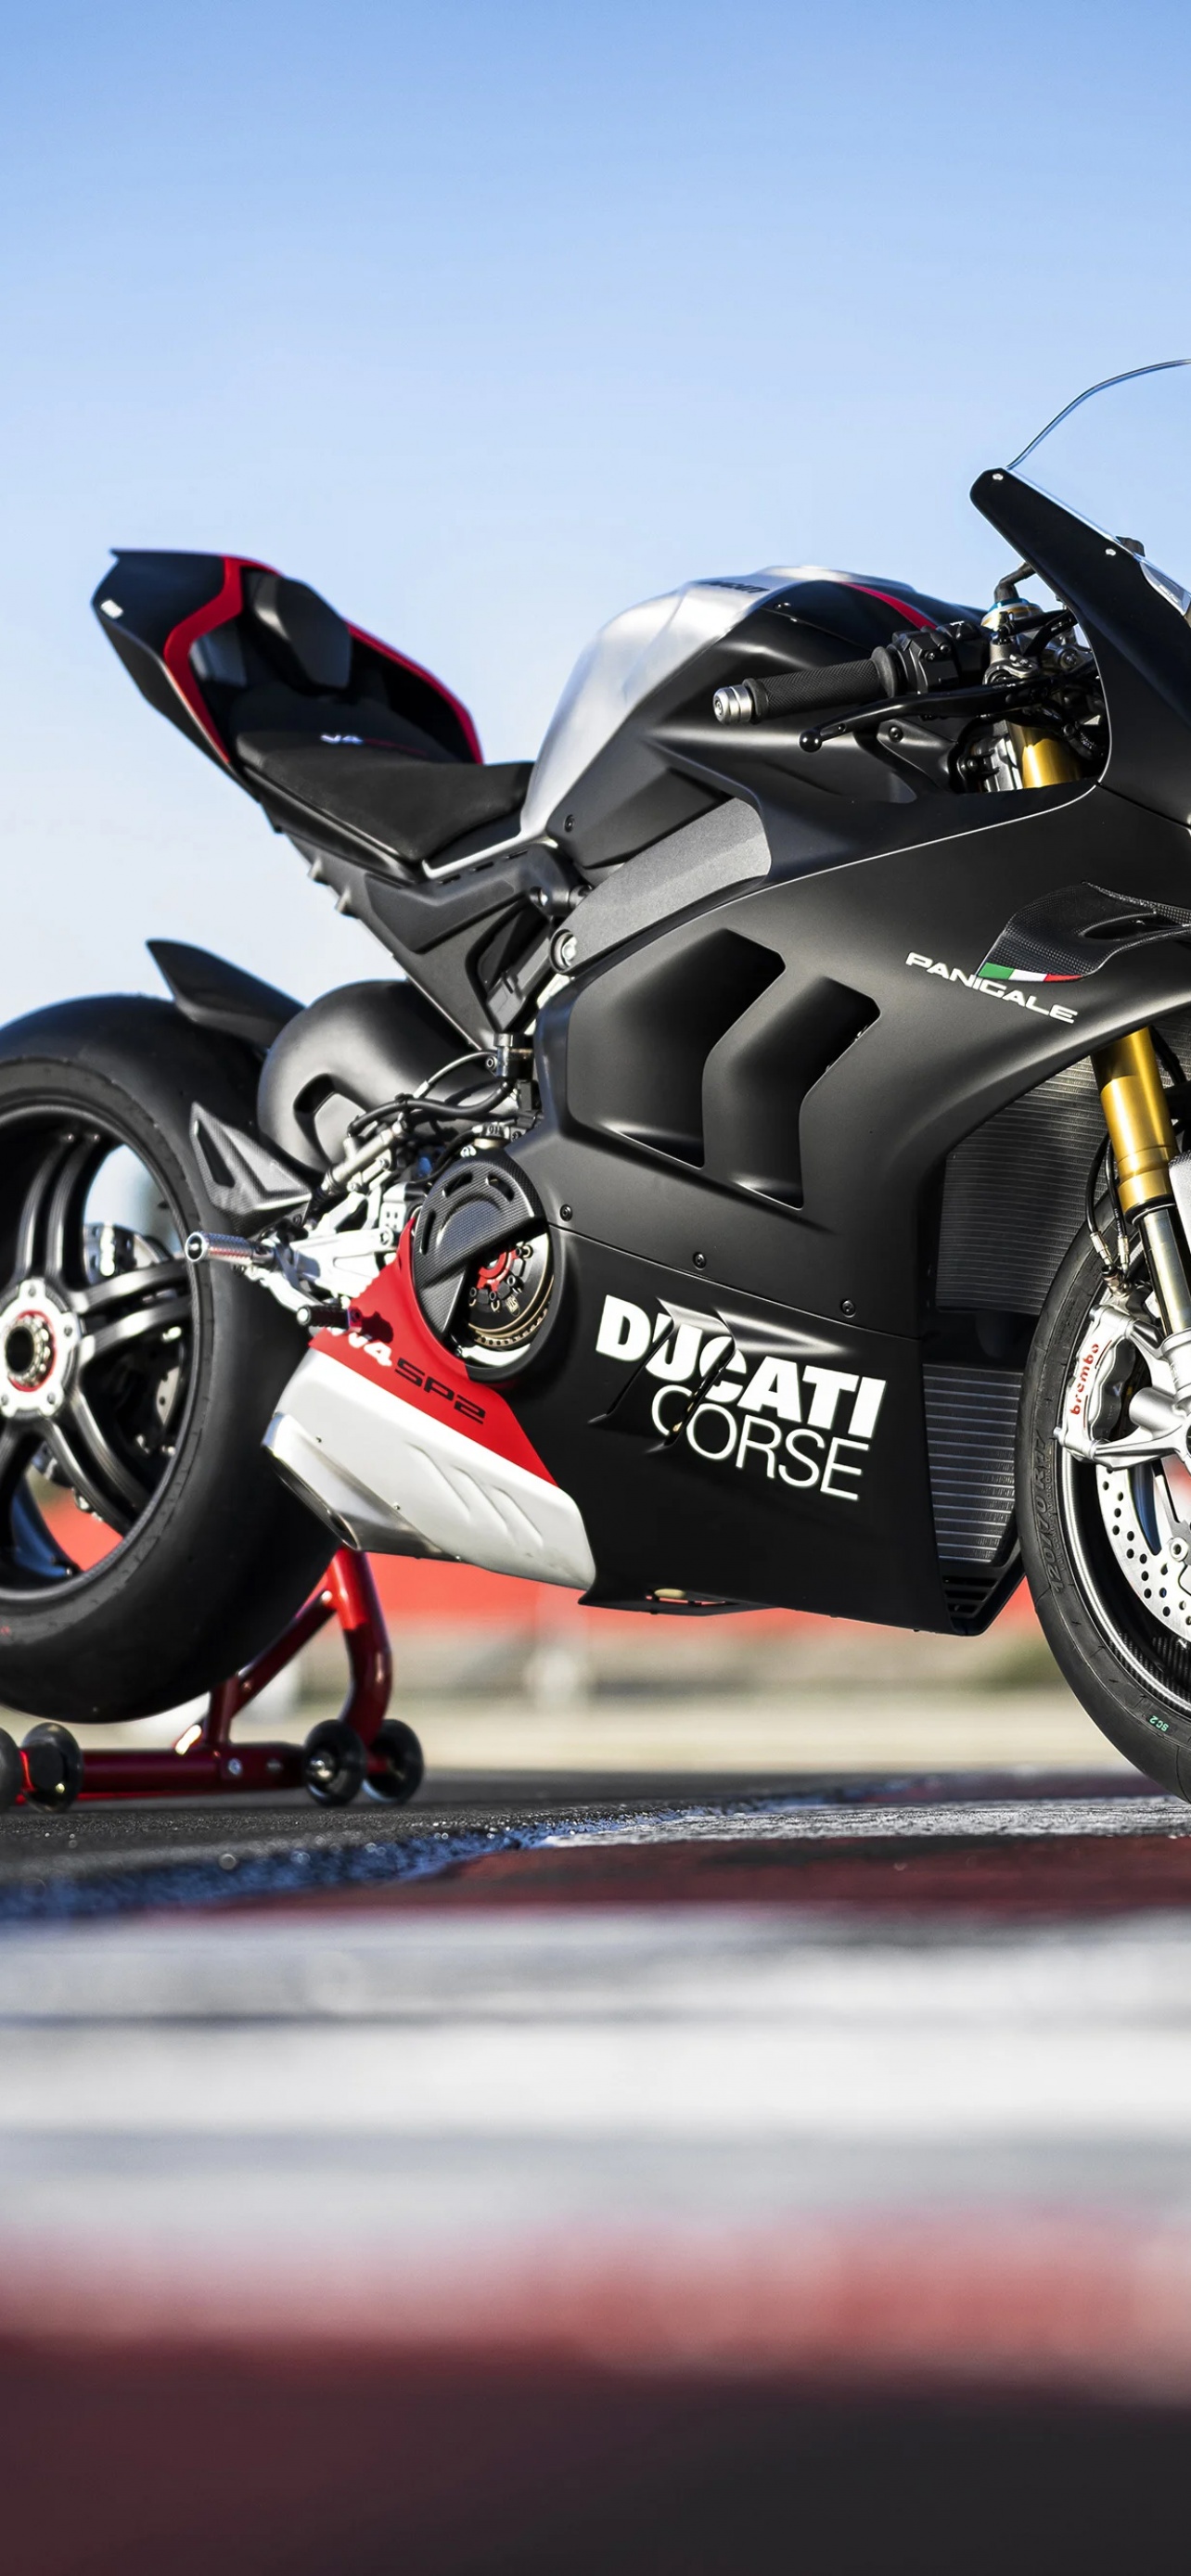 Ducati Wallpapers (85+ images inside)